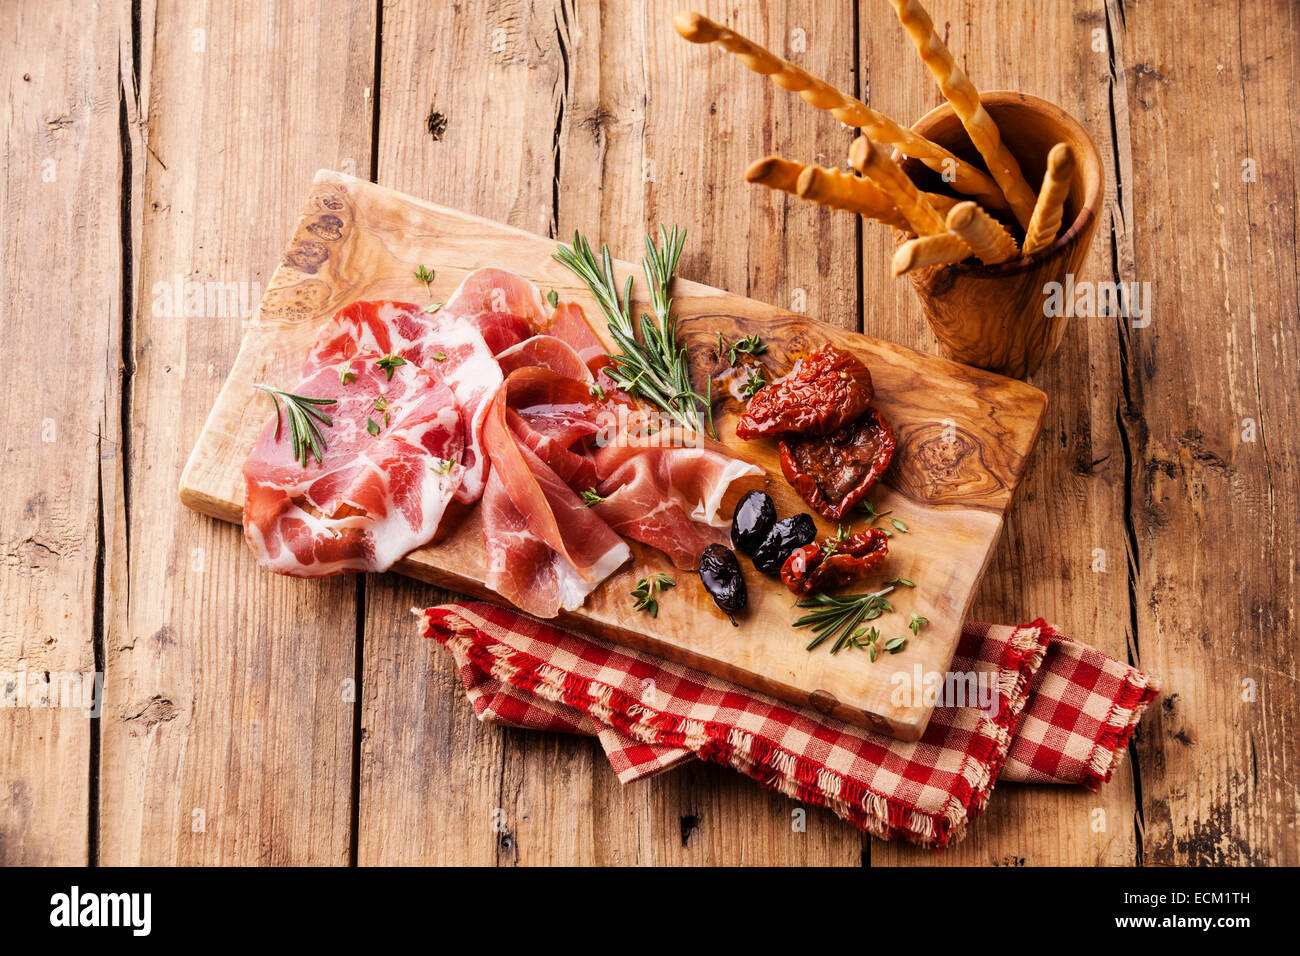 Cold meat plate and bread sticks on wooden background Stock Photo